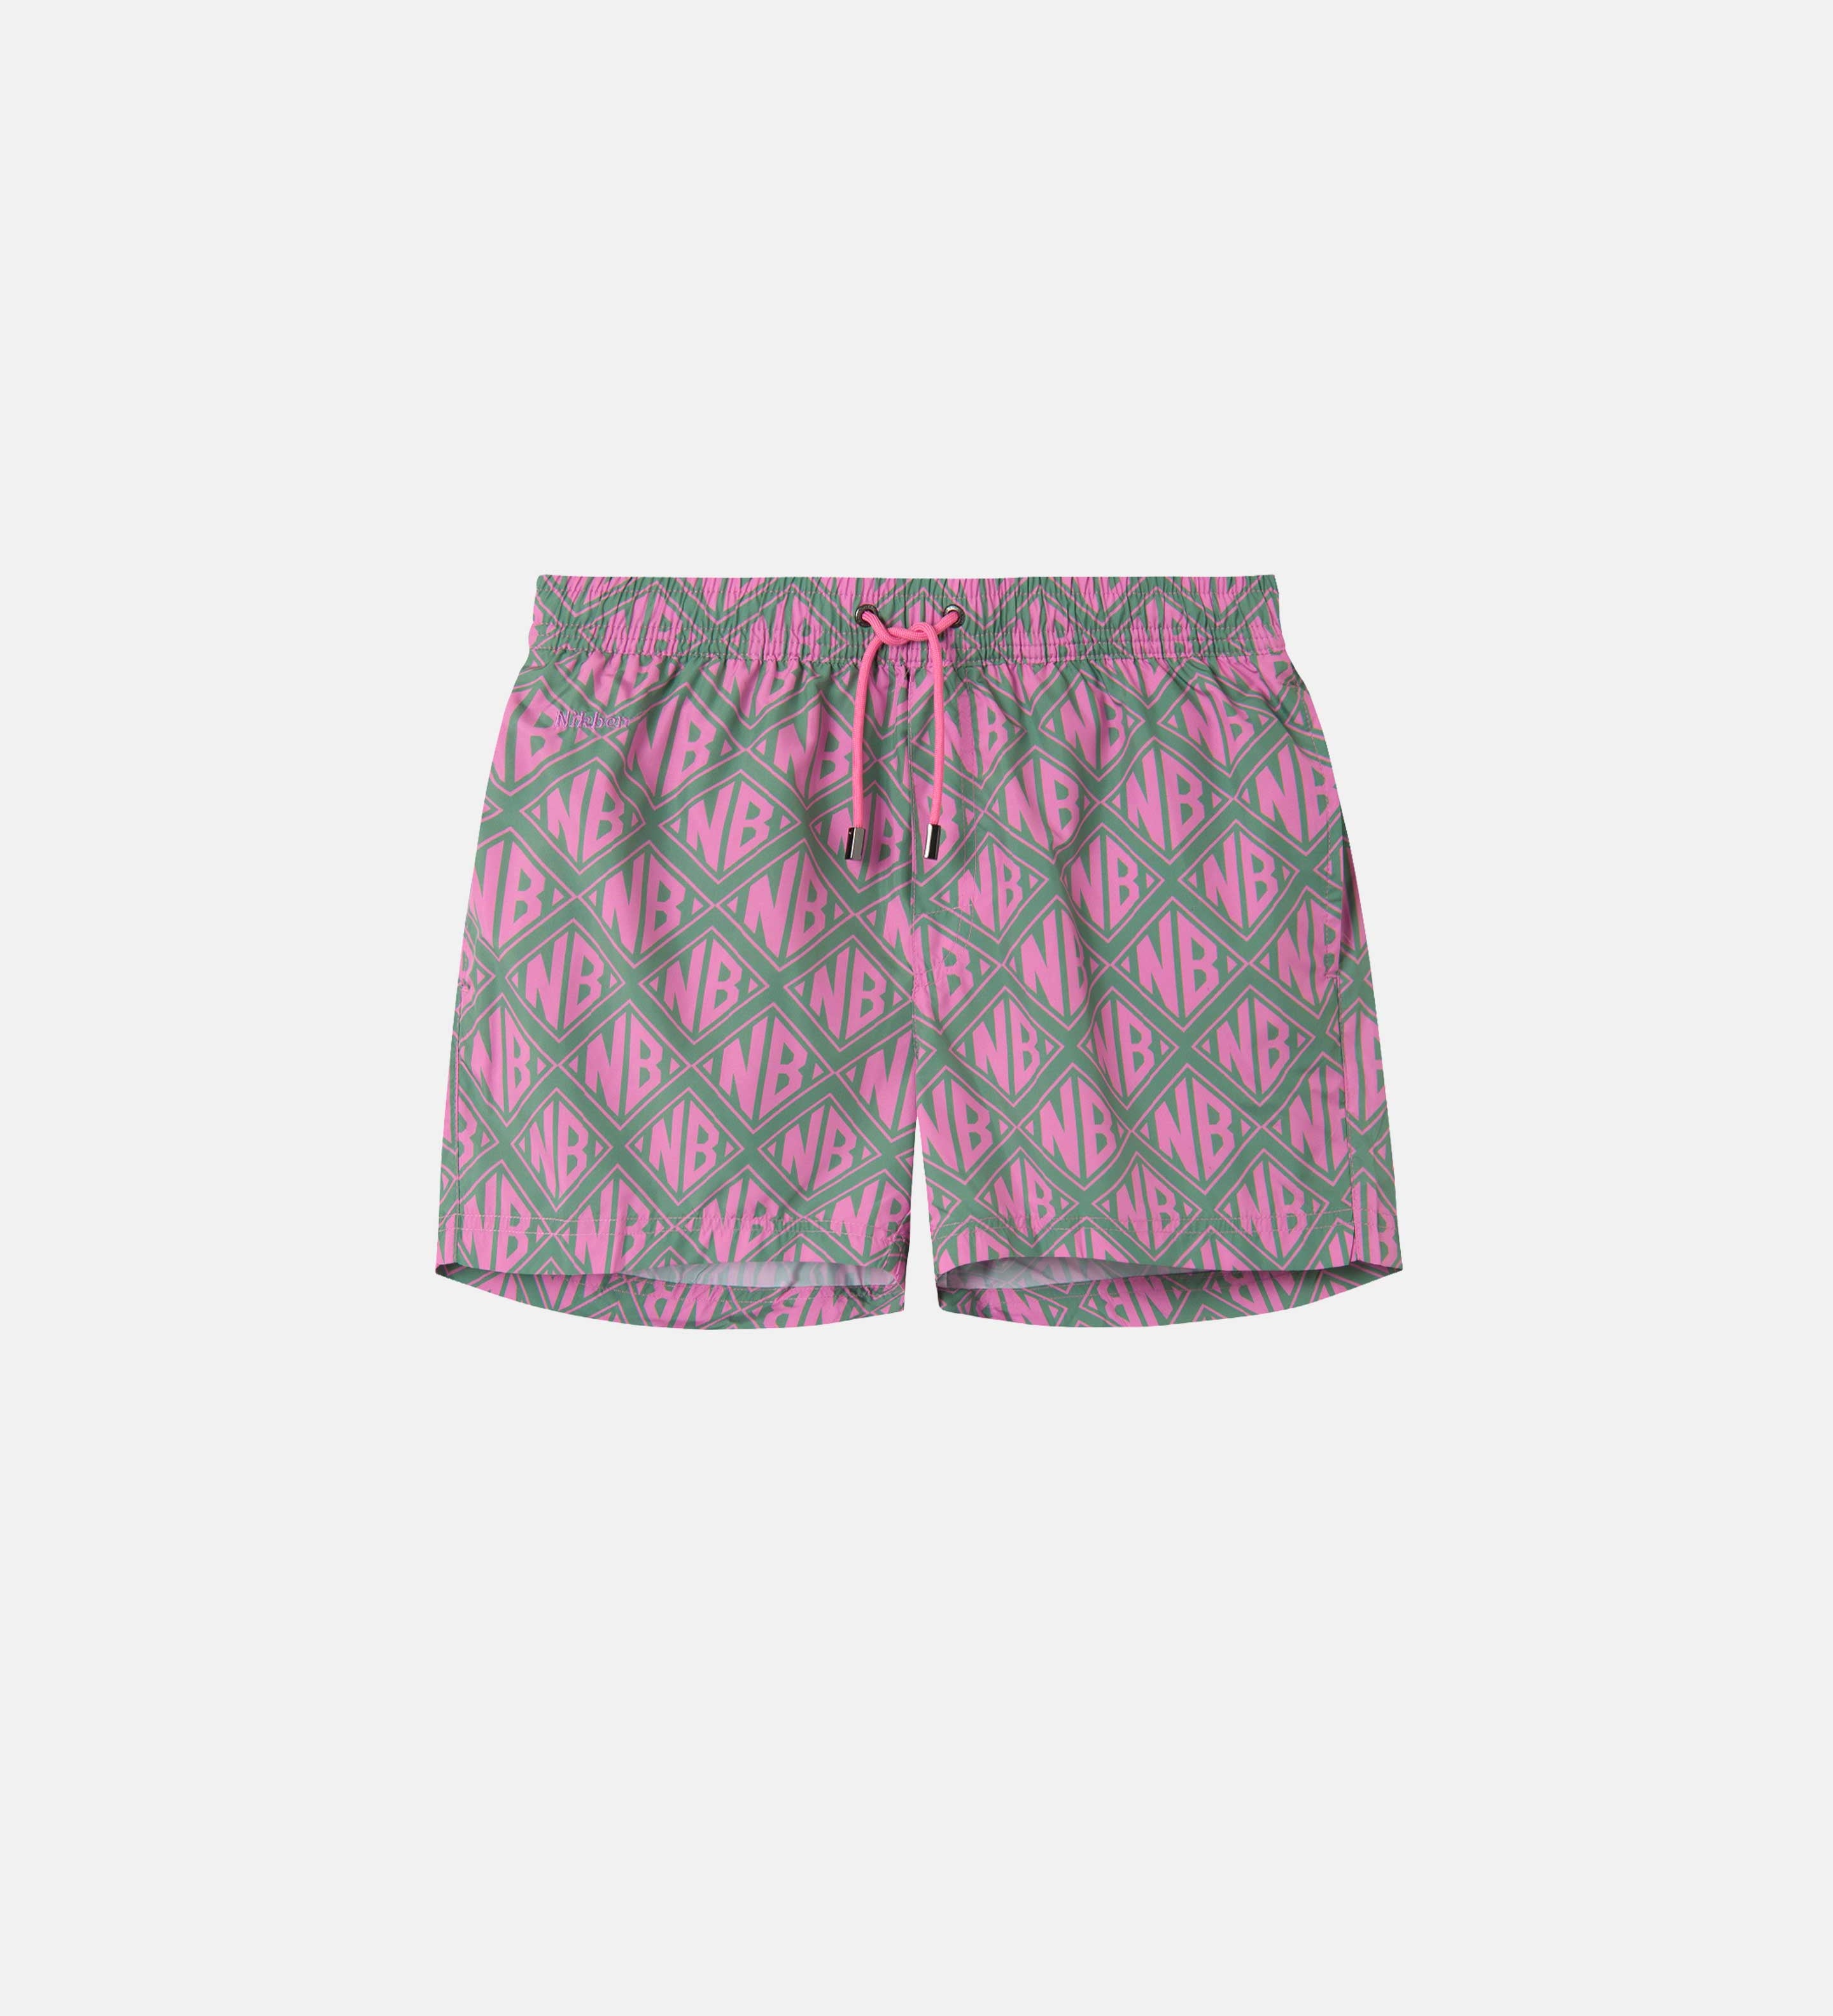 Olive and pink swim trunks with pink "NB" print. Mid length with drawstring and two side pockets.